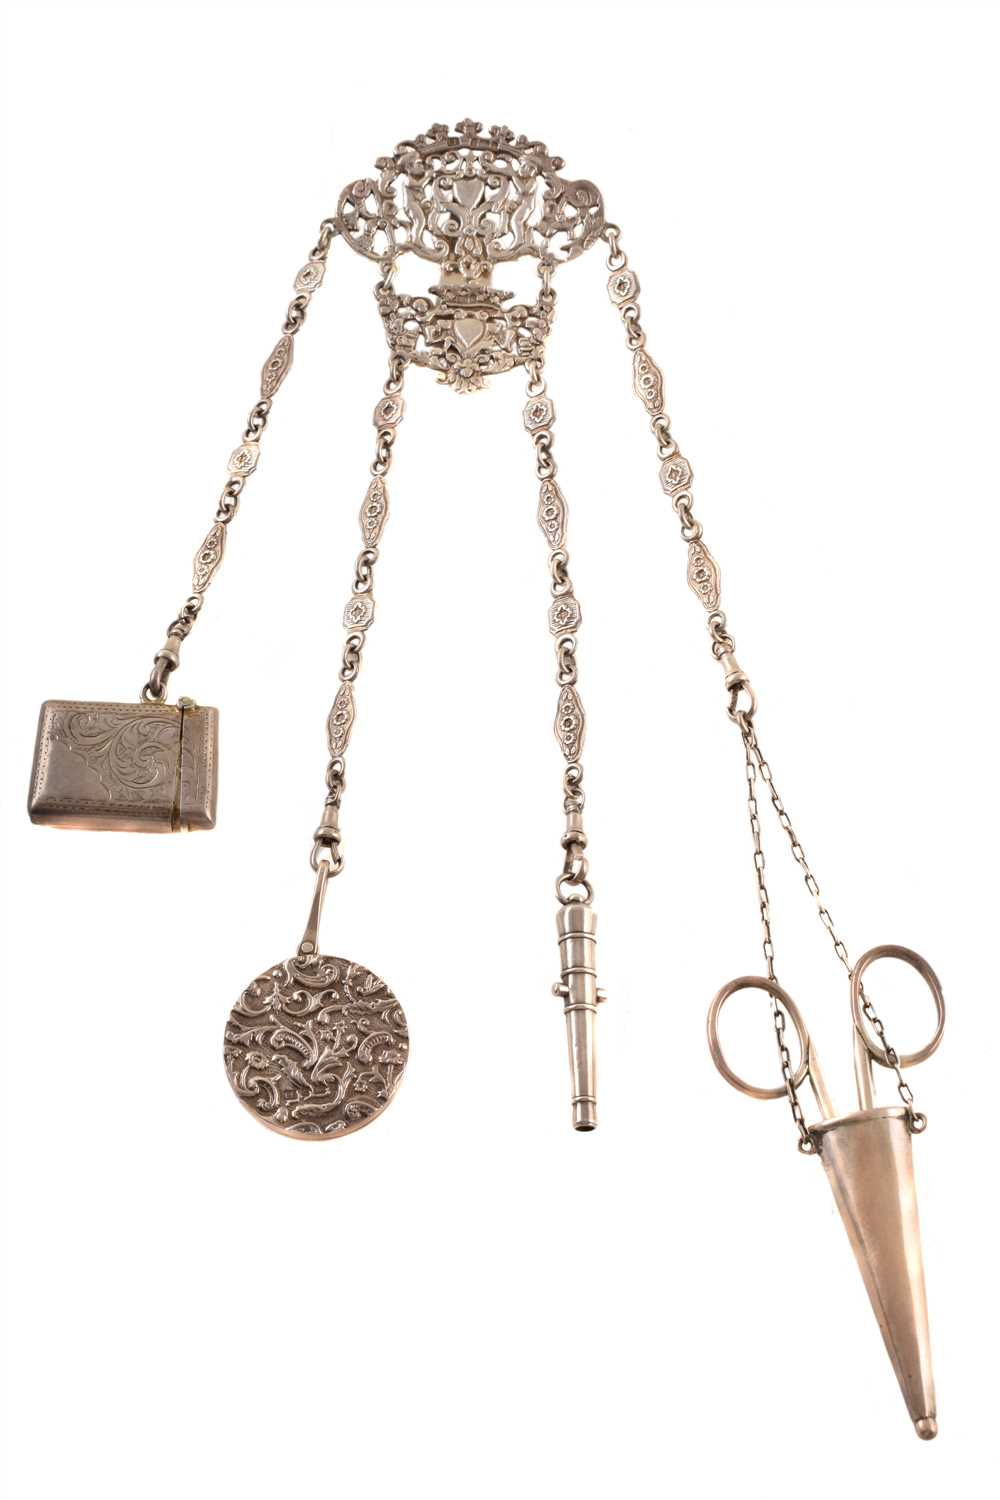 Lot 50 - An Edwardian silver chatelaine chain